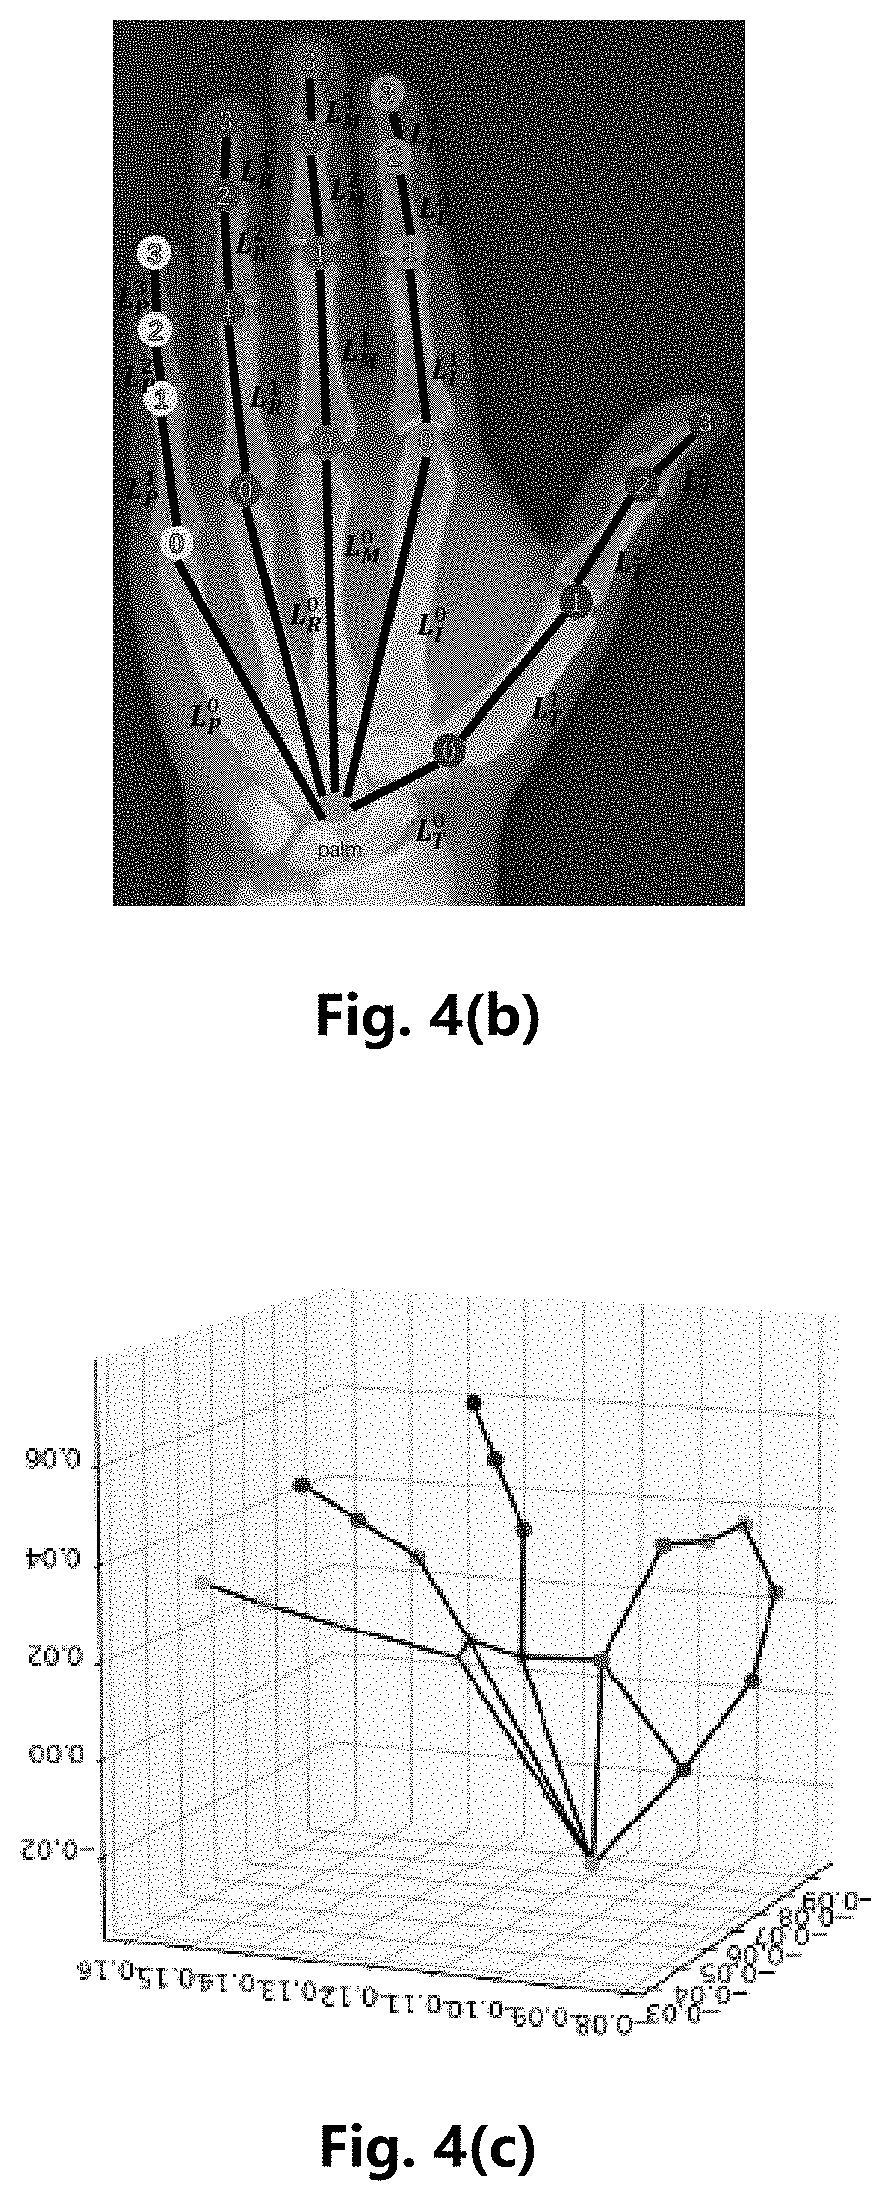 Method for automatically generating hand marking data and calculating bone length